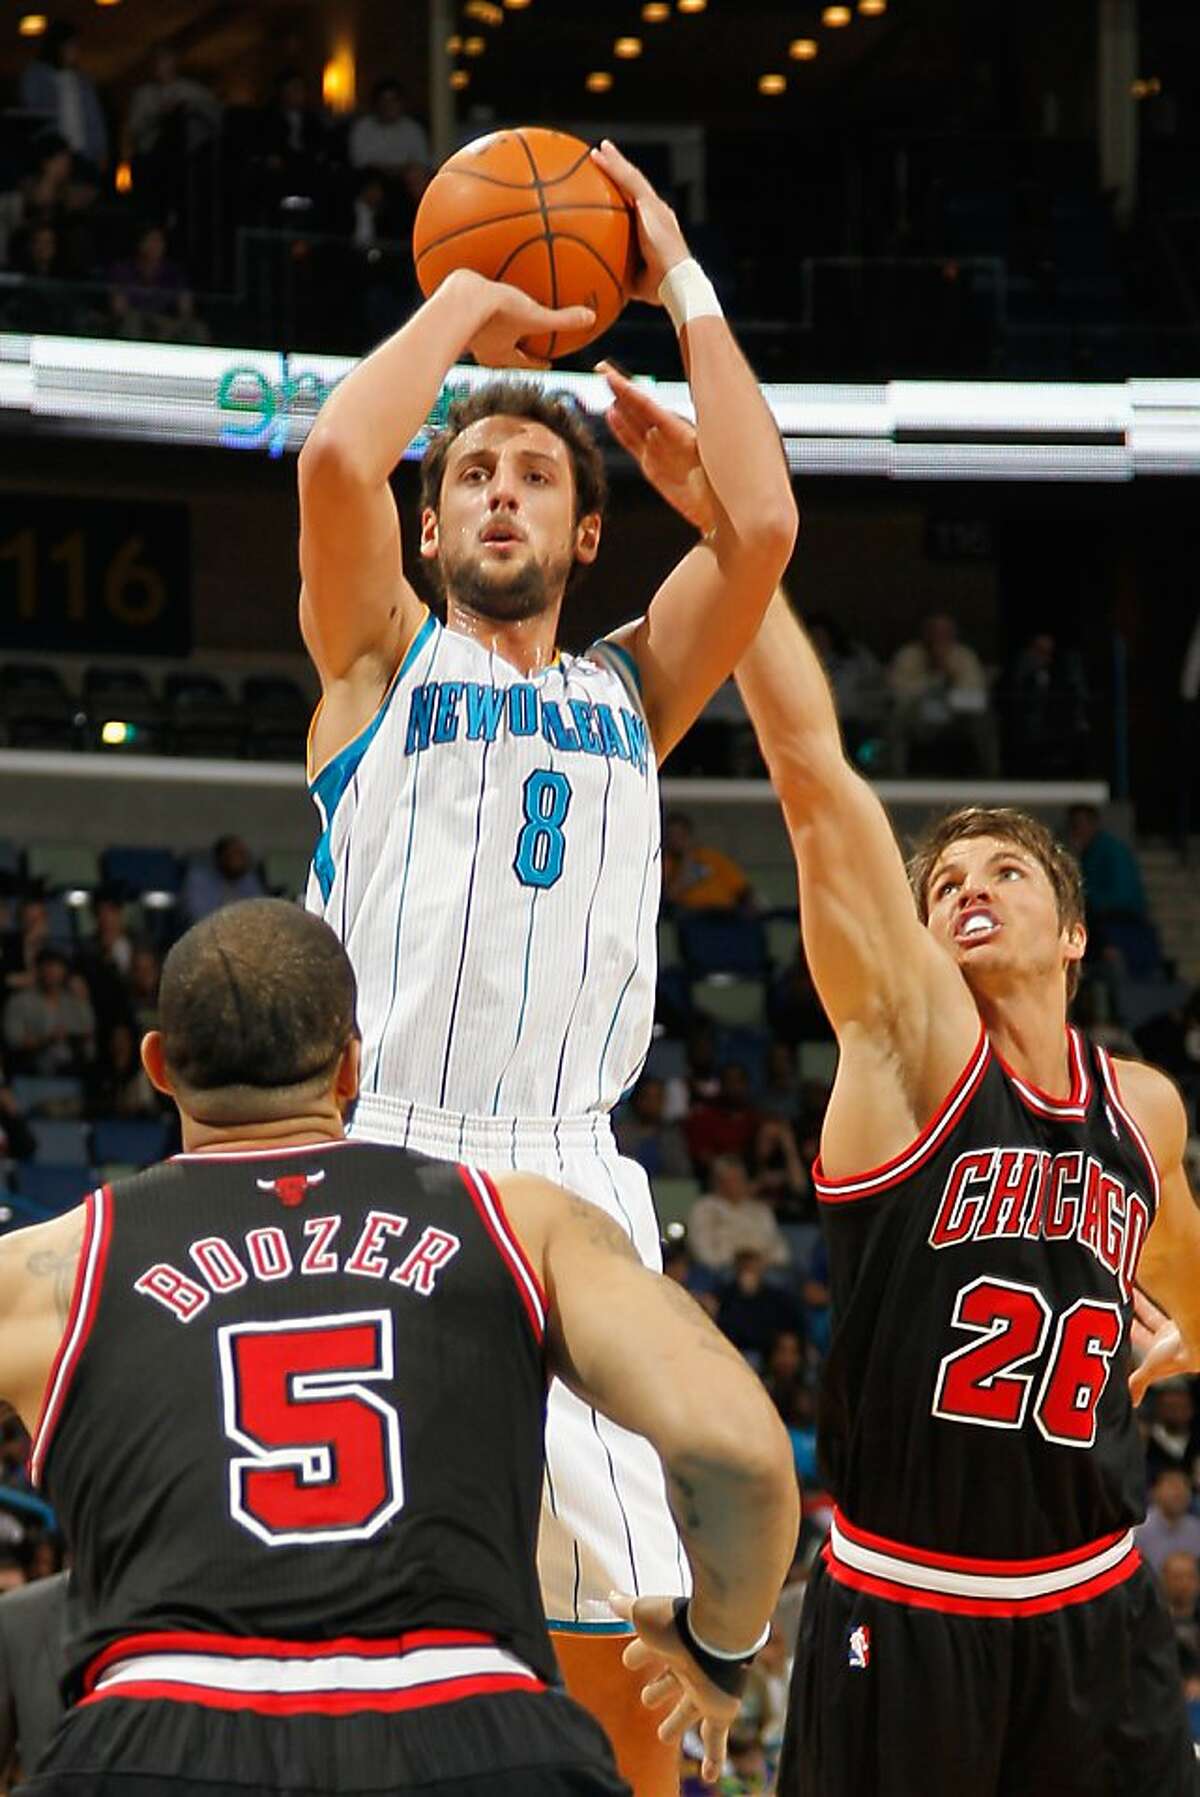 NEW ORLEANS, LA - FEBRUARY 08: Marco Belinelli #8 of the New Orleans Hornets shoots the ball over Kyle Korver #26 and Carlos Boozer #5 of the Chicago Bulls at New Orleans Arena on February 8, 2012 in New Orleans, Louisiana. NOTE TO USER: User expressly acknowledges and agrees that, by downloading and or using this photograph, User is consenting to the terms and conditions of the Getty Images License Agreement. (Photo by Chris Graythen/Getty Images)